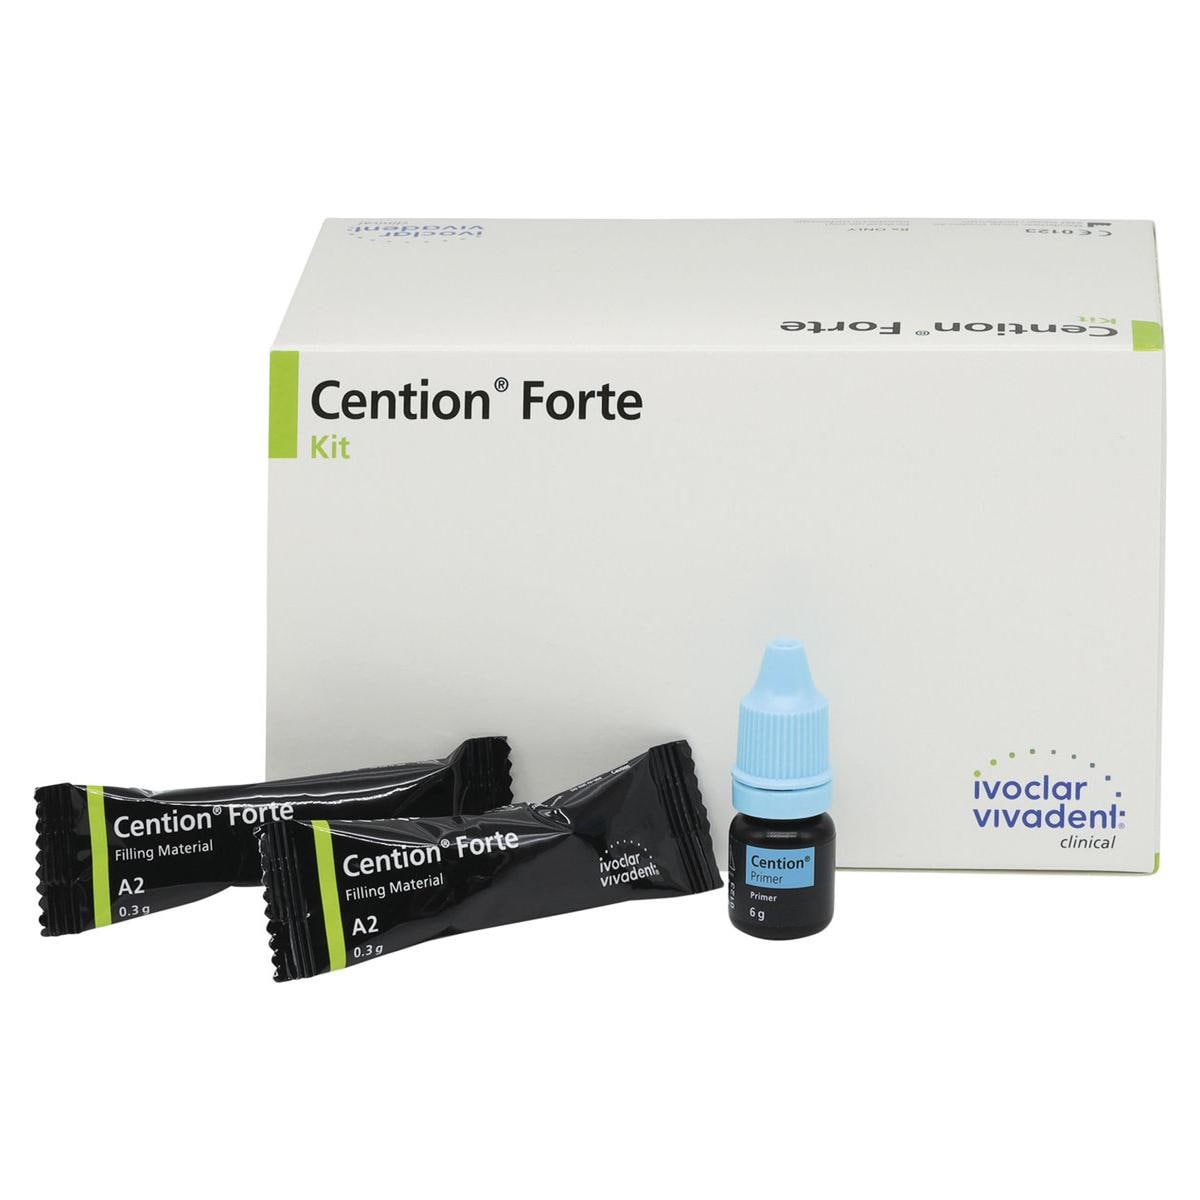 Cention Forte A2 50x0,3g Refill